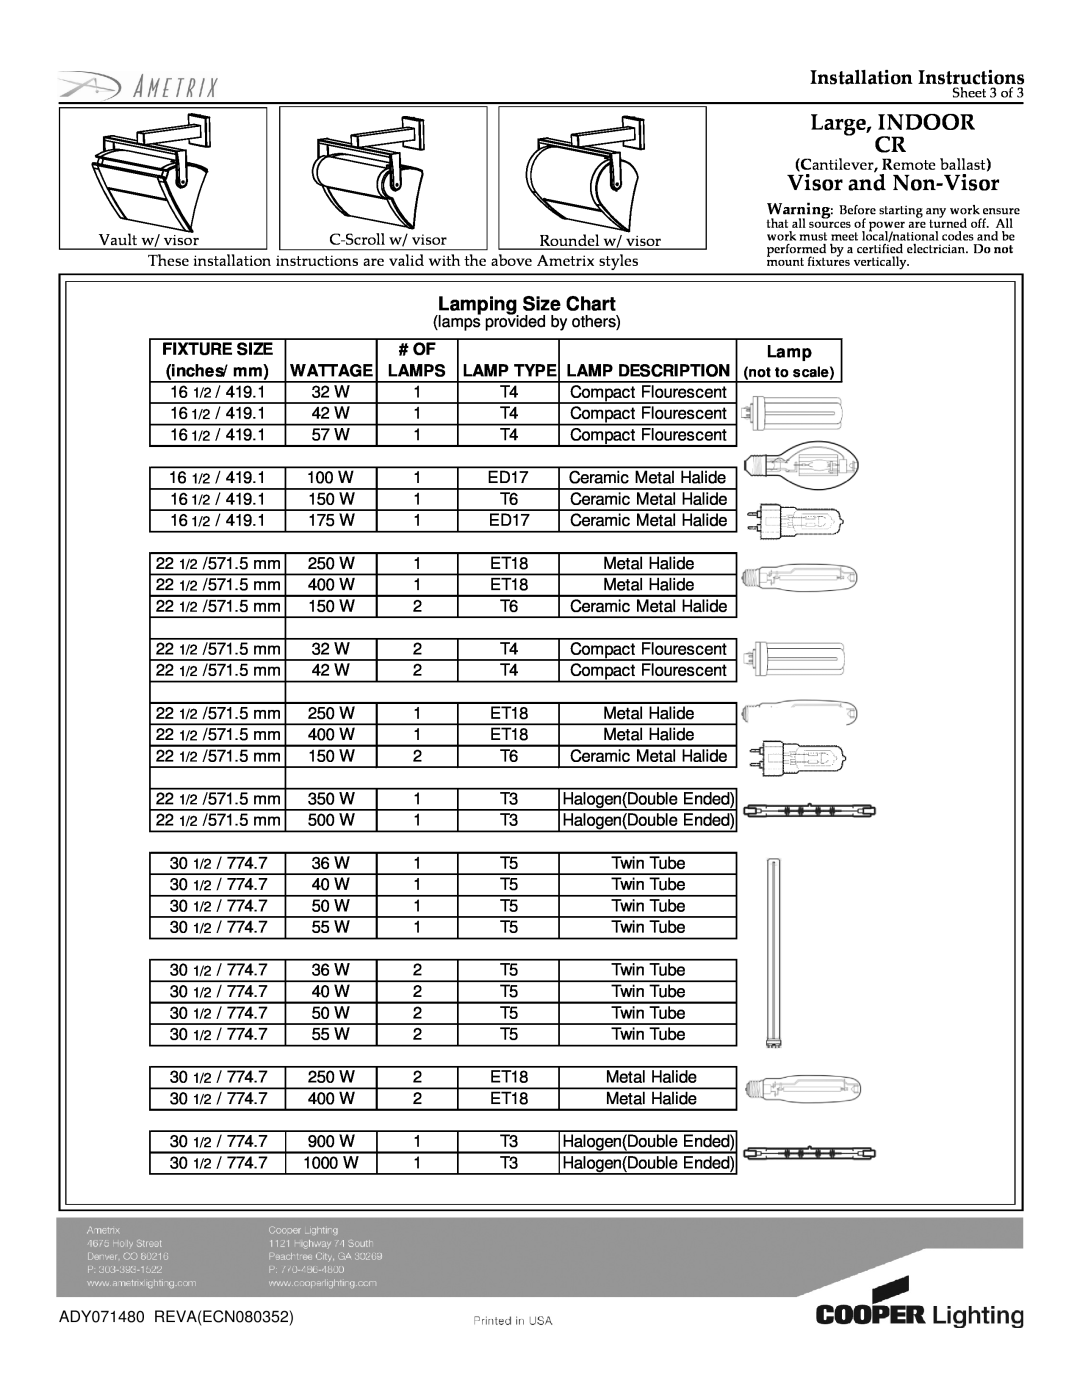 Cooper Lighting ADY071480 Large, INDOOR CR, Visor and Non-Visor, Installation Instructions, Fixture Size, # Of, Lamp 